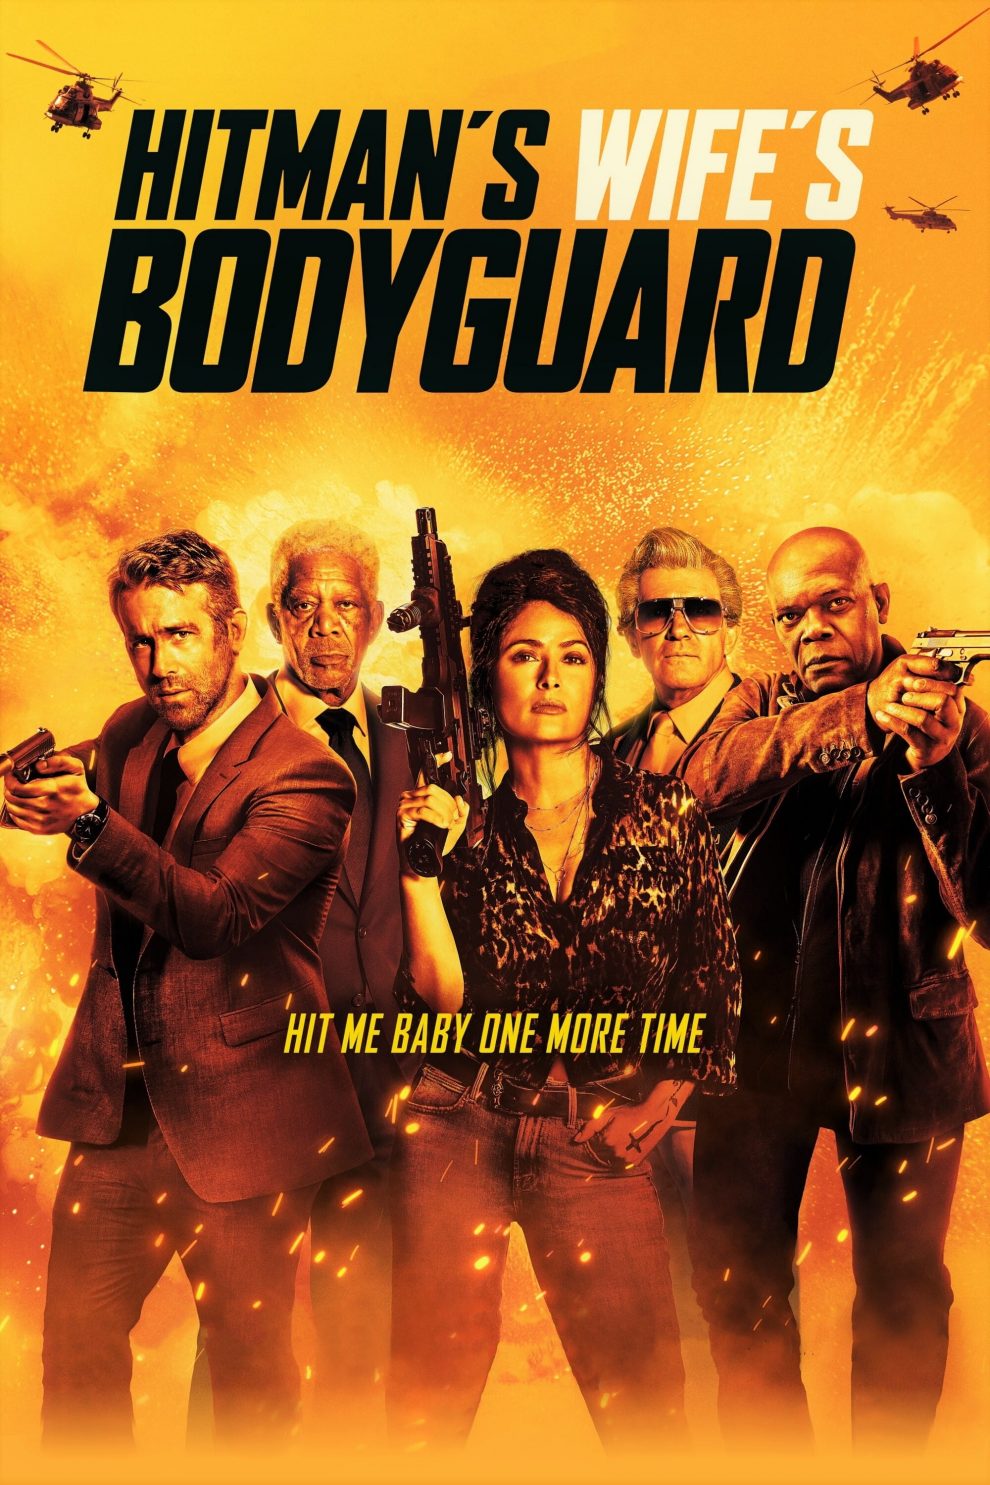 Poster for the movie "Hitman's Wife's Bodyguard"